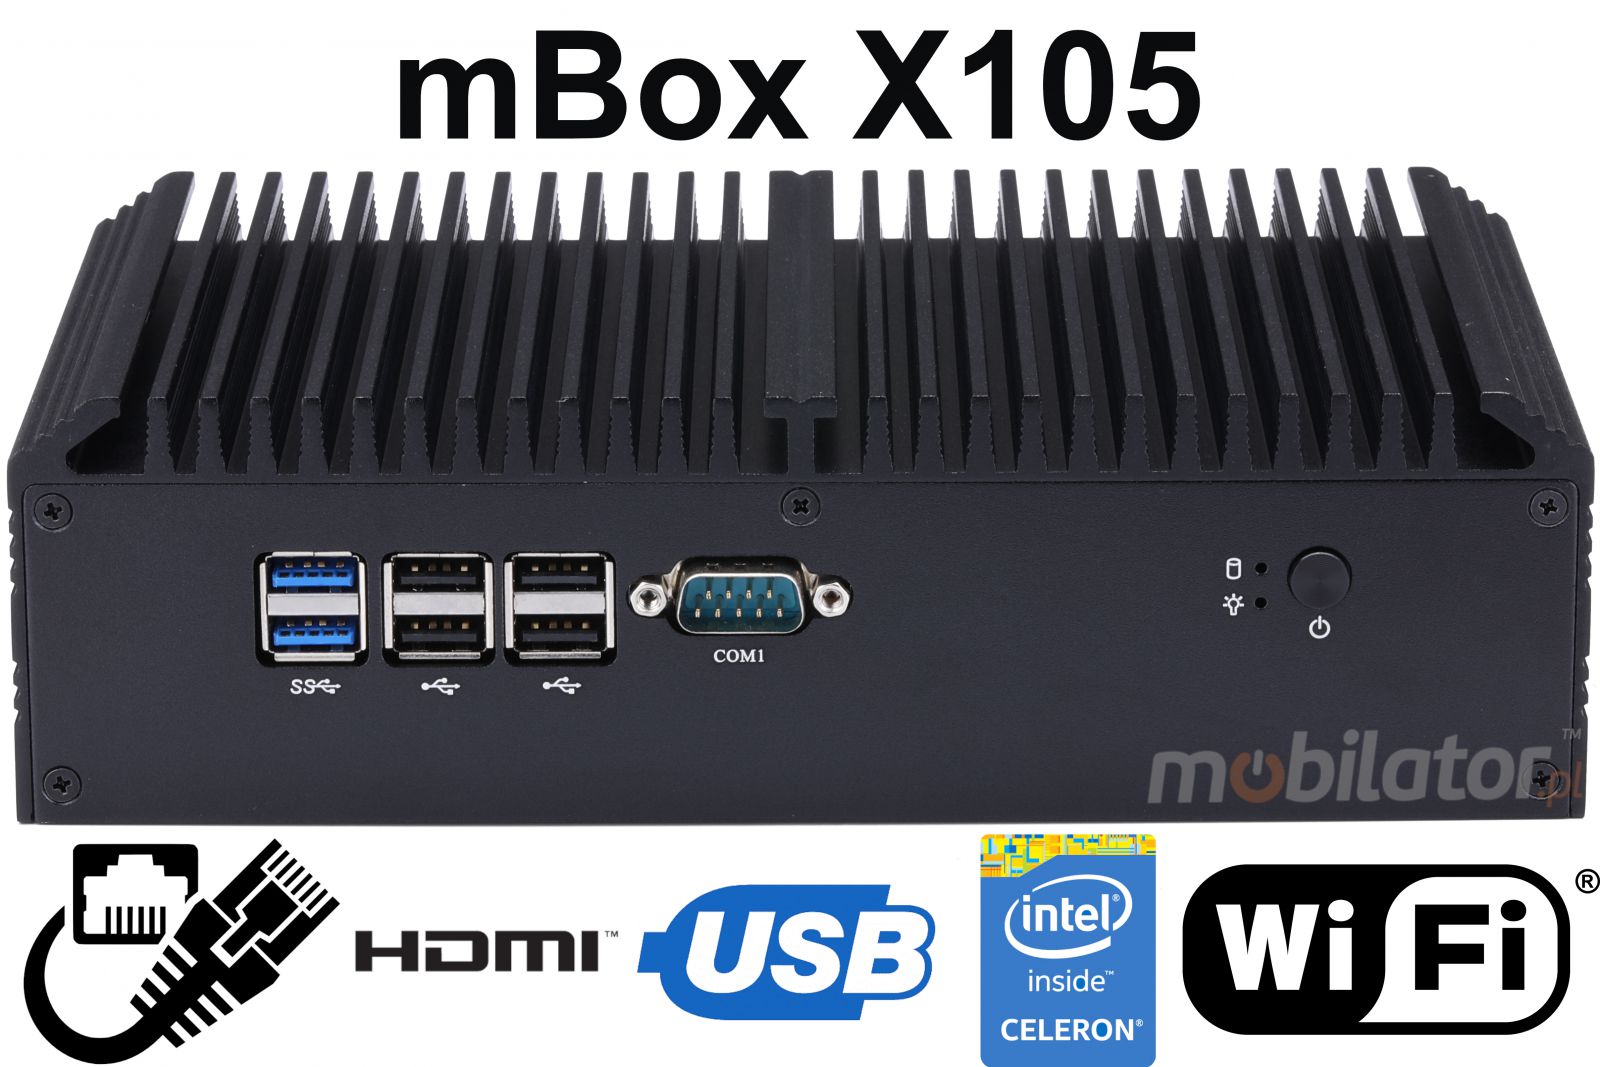 mBox X155 v.3 - Industrial Mini Computer with Intel Celeron 3865U Processor - M.2 disk (with second disk option) - USB 3.0, 2x HDMI and WiFi - Title image